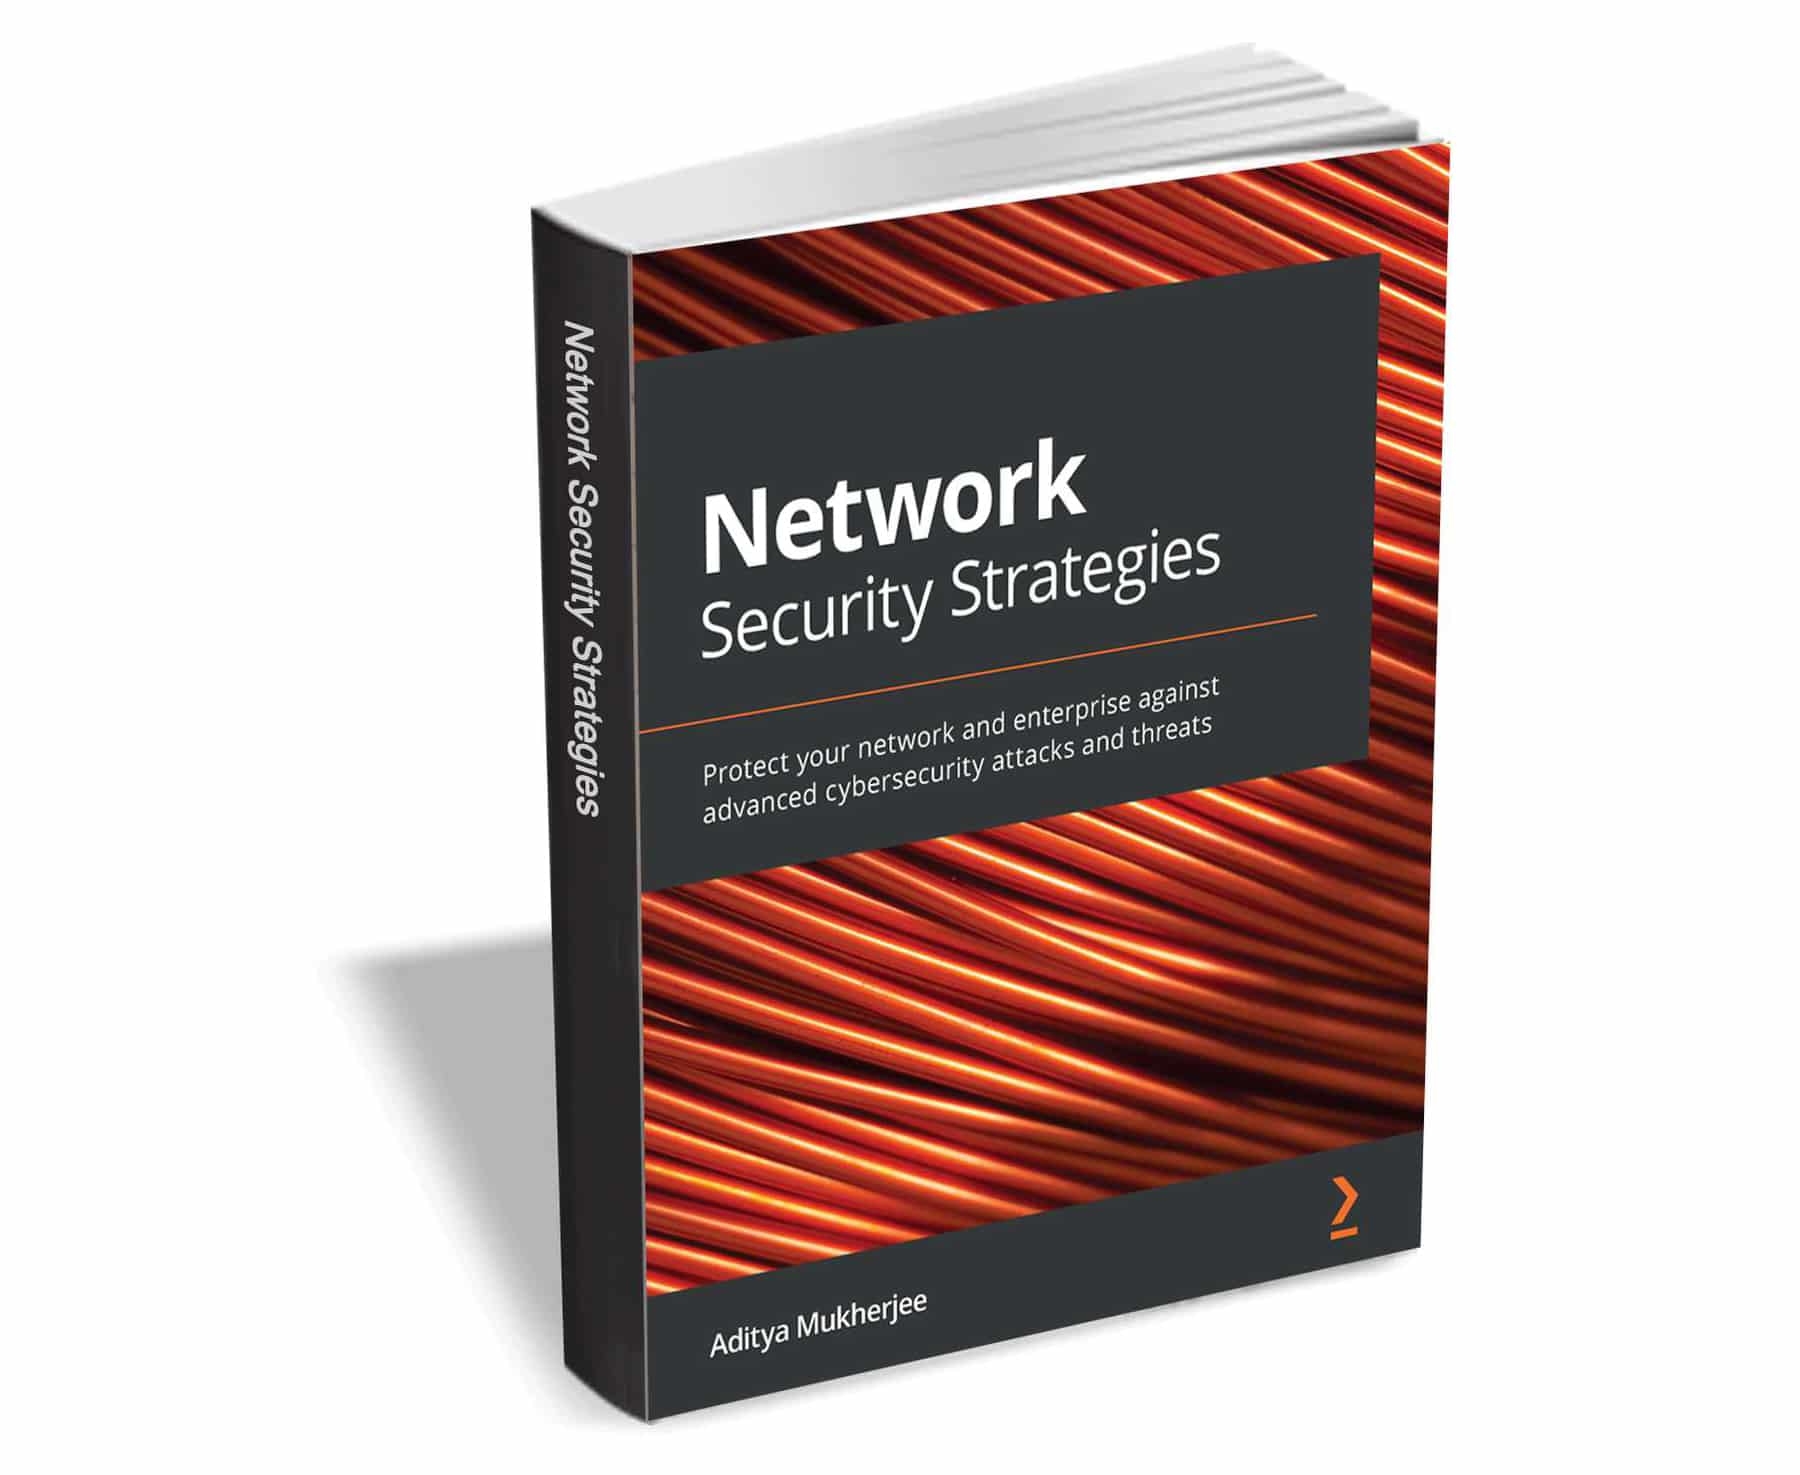 Get 'Network Security Strategies' ($27.99 value) FREE for a limited time